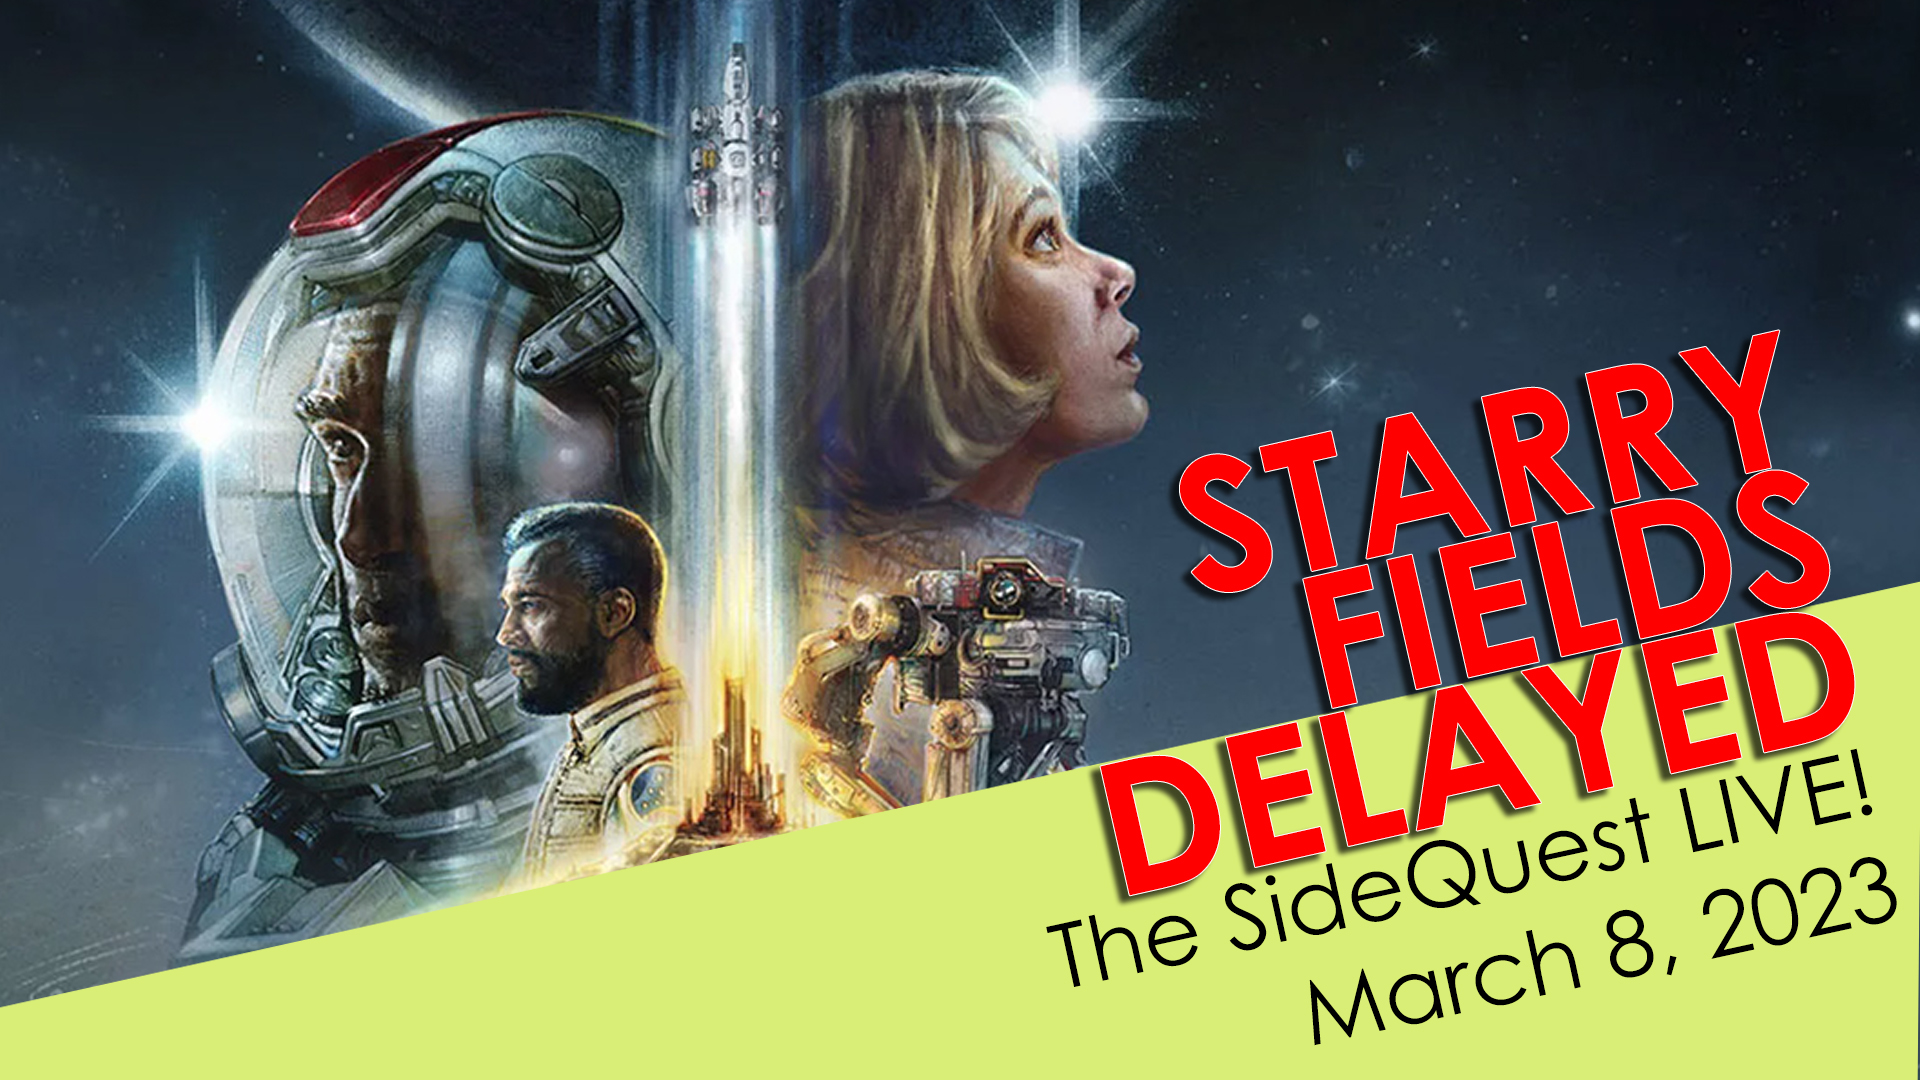 The SideQuest LIVE March 8, 2023: Starry Fields Delayed